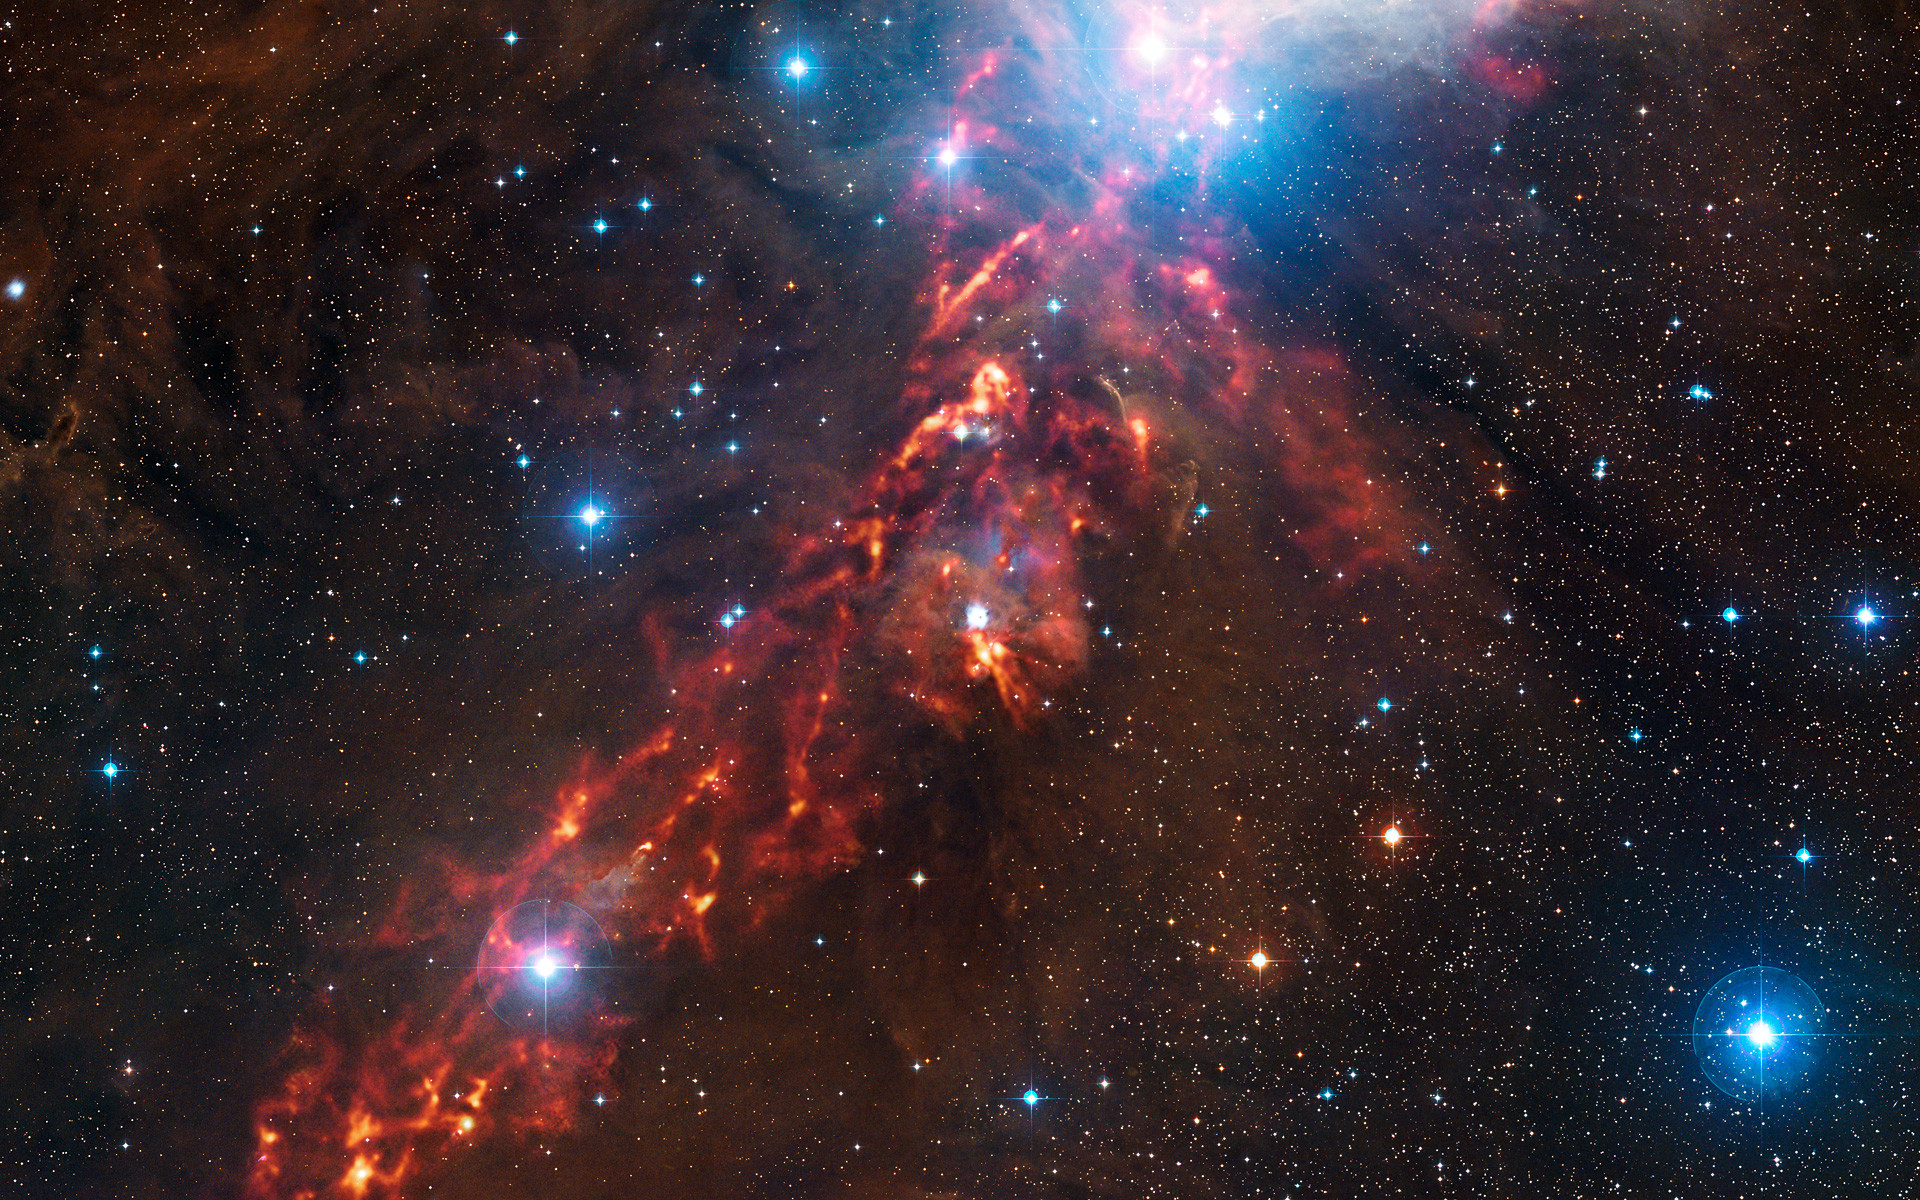 FileAn APEX view of star formation in the Orion Nebula wallpaper